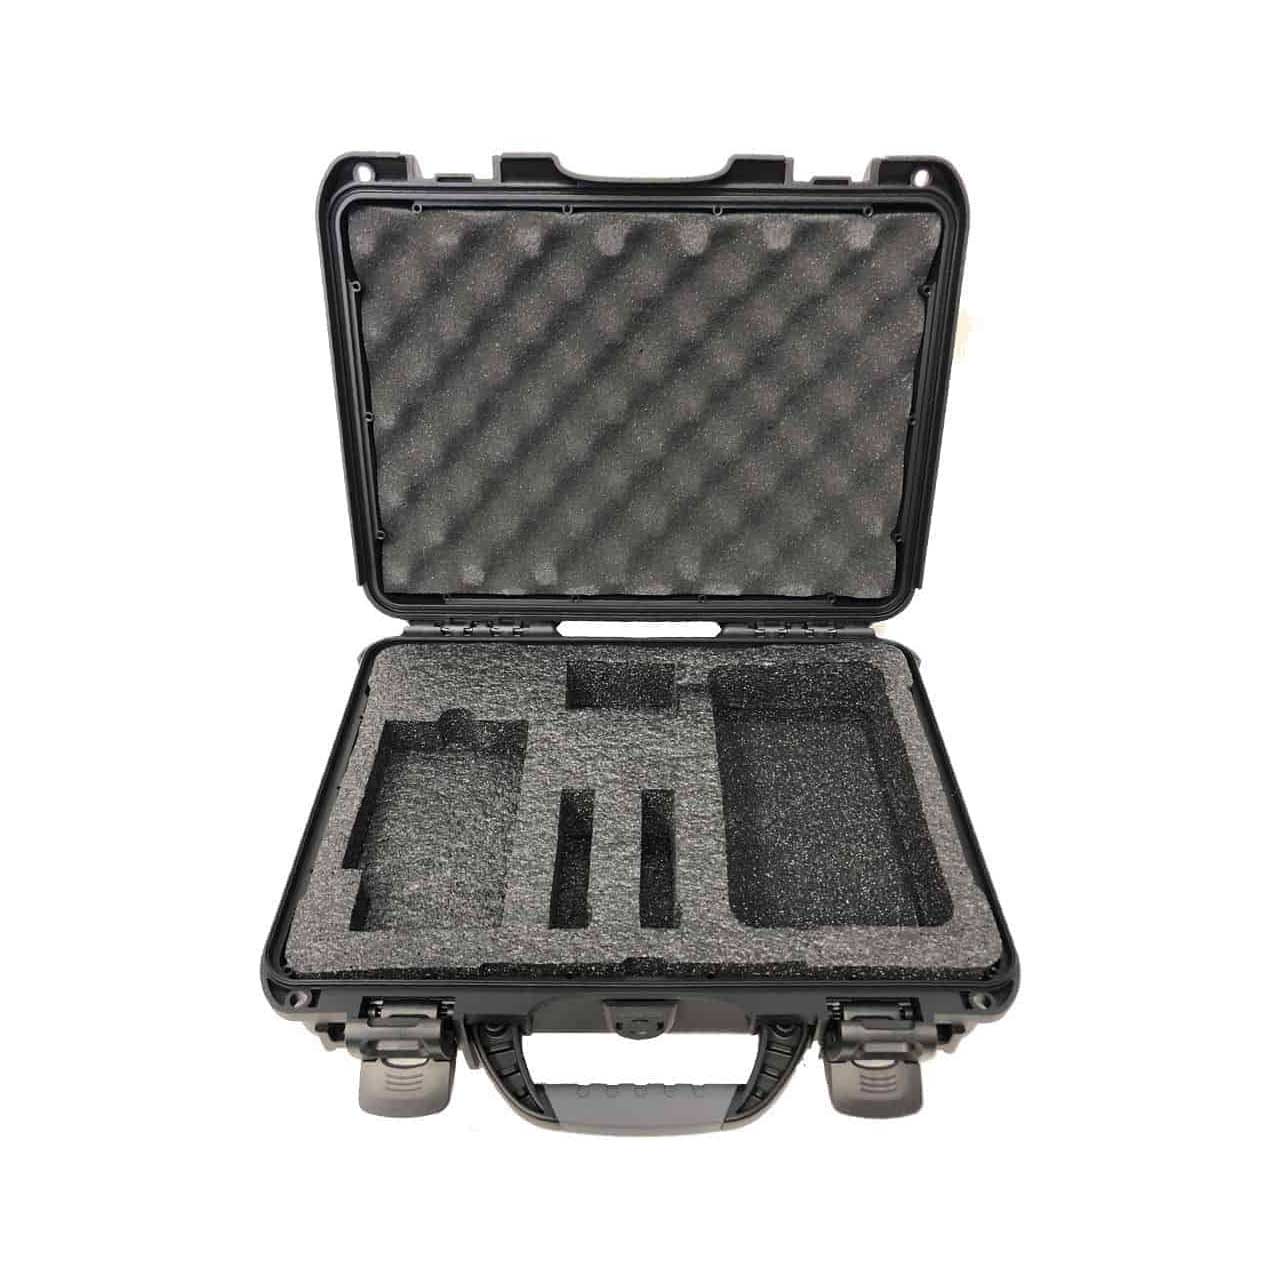 Dsan Pen-Style Laser Pointer with Case